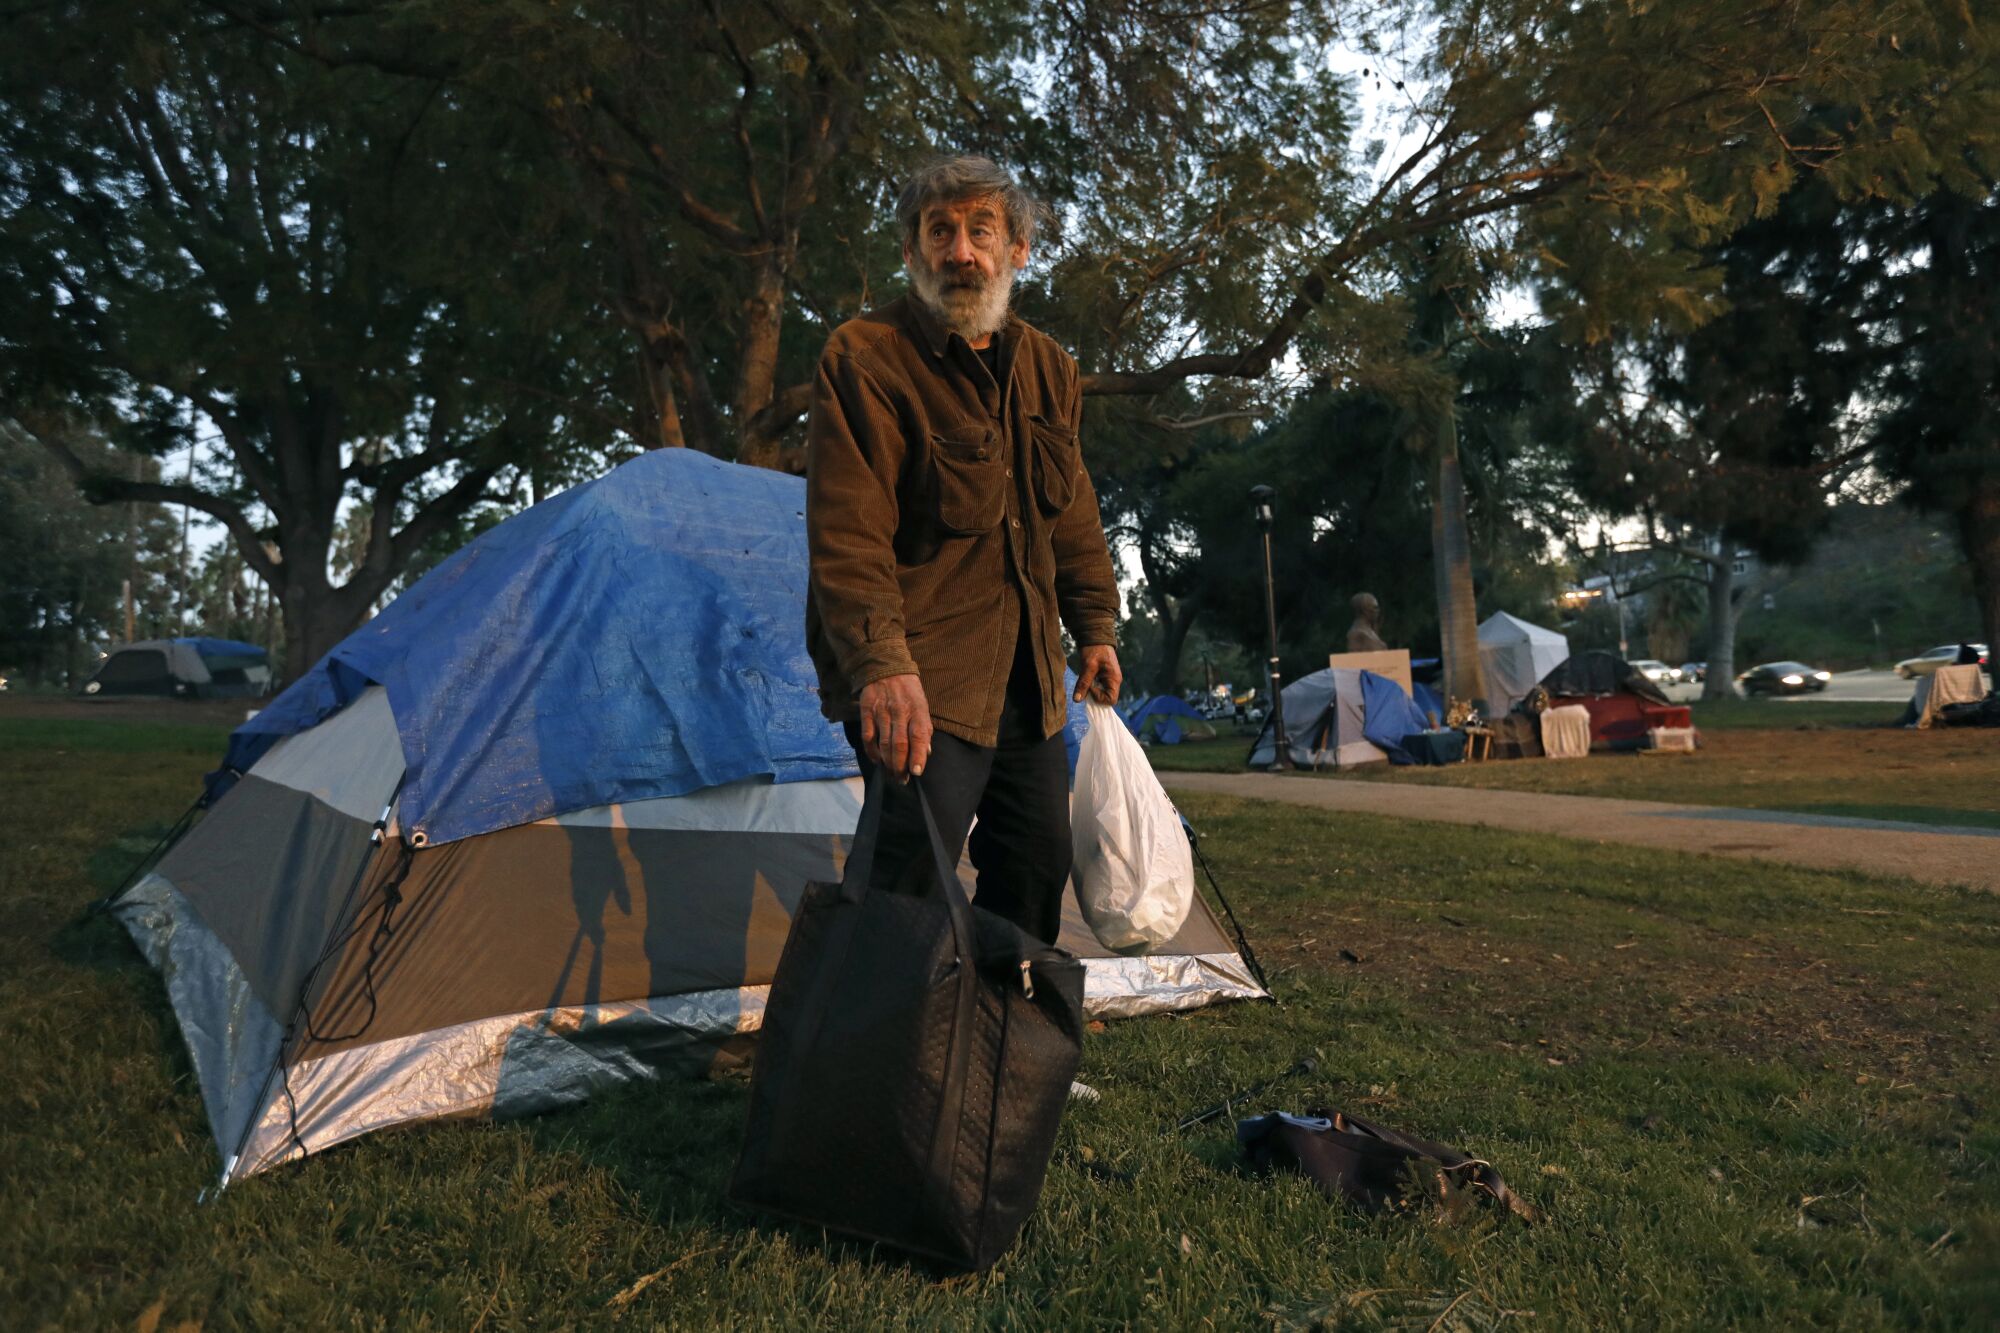 Frank Chiaro,  71, sets up a new tent at Echo Park.